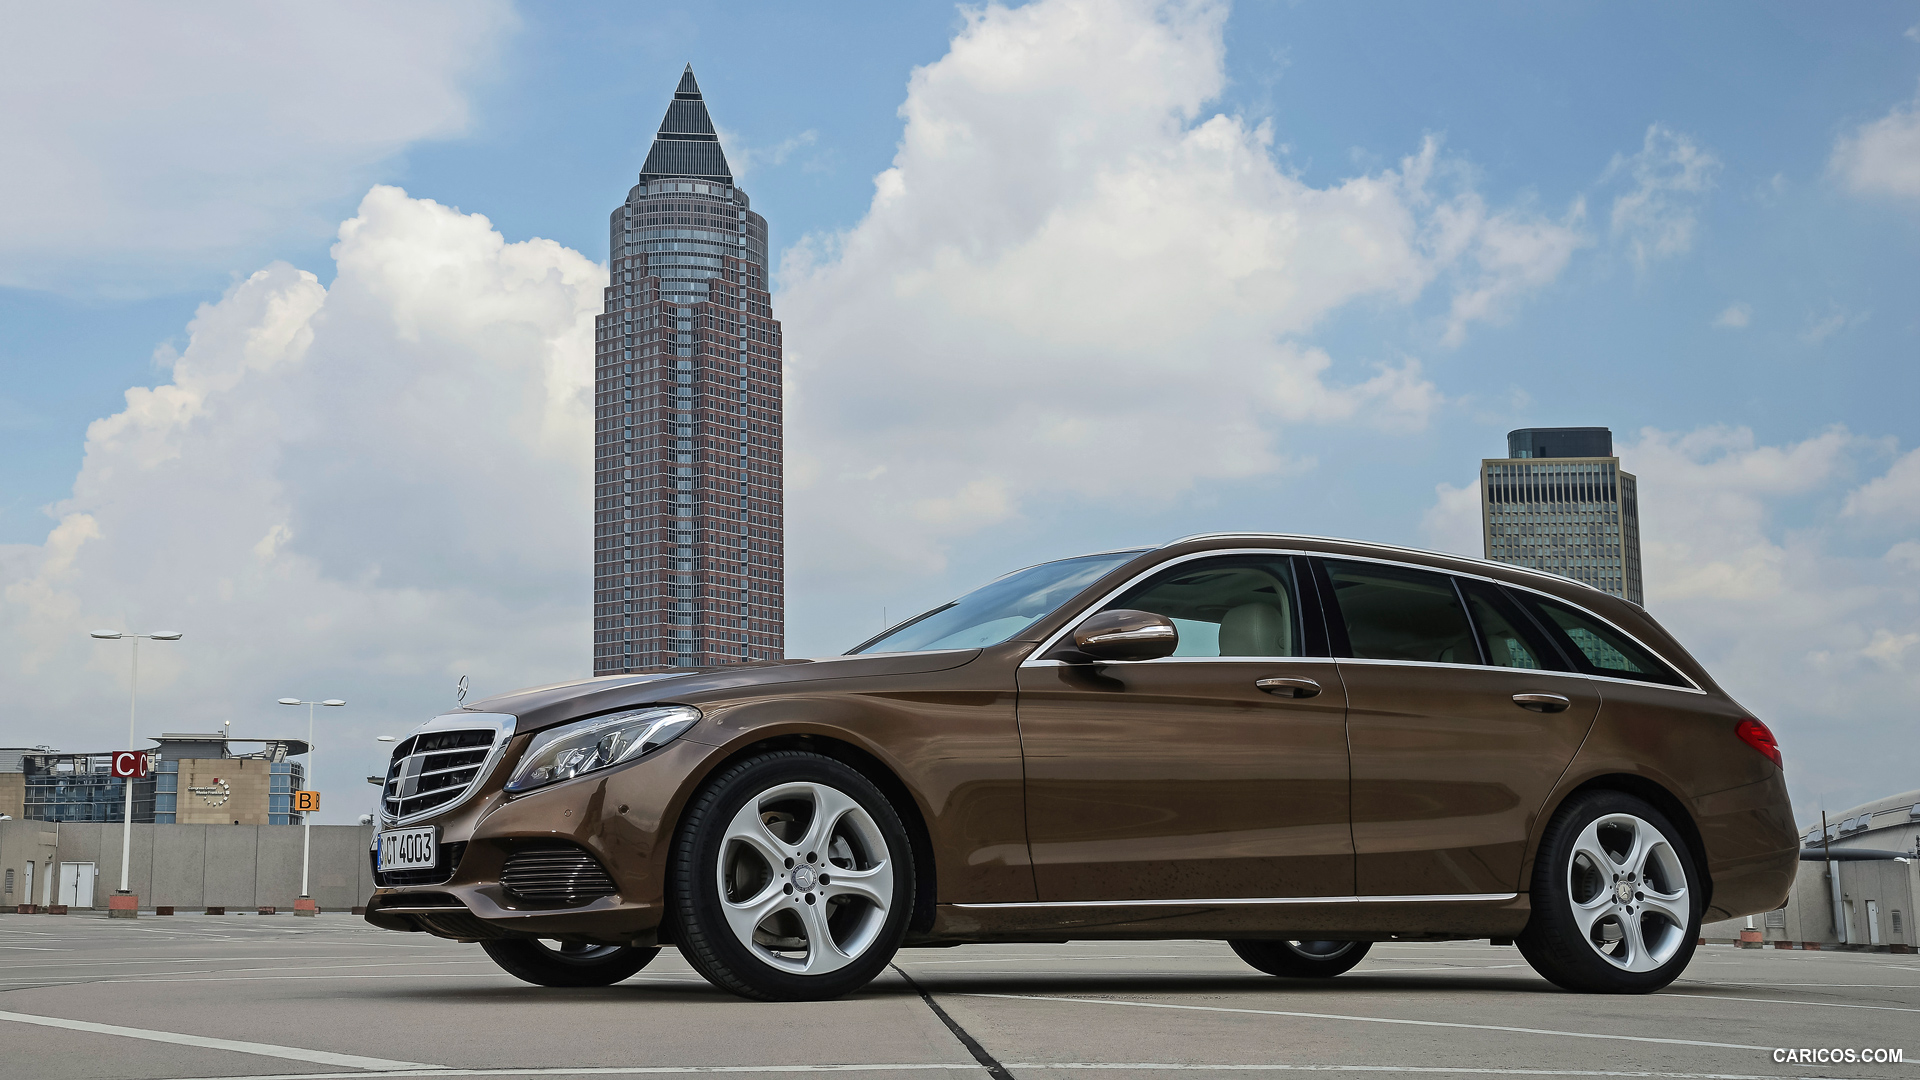 2015 Mercedes-Benz C-Class C 200 Estate (Exclusive, Citrin Brown) - Side, #148 of 173